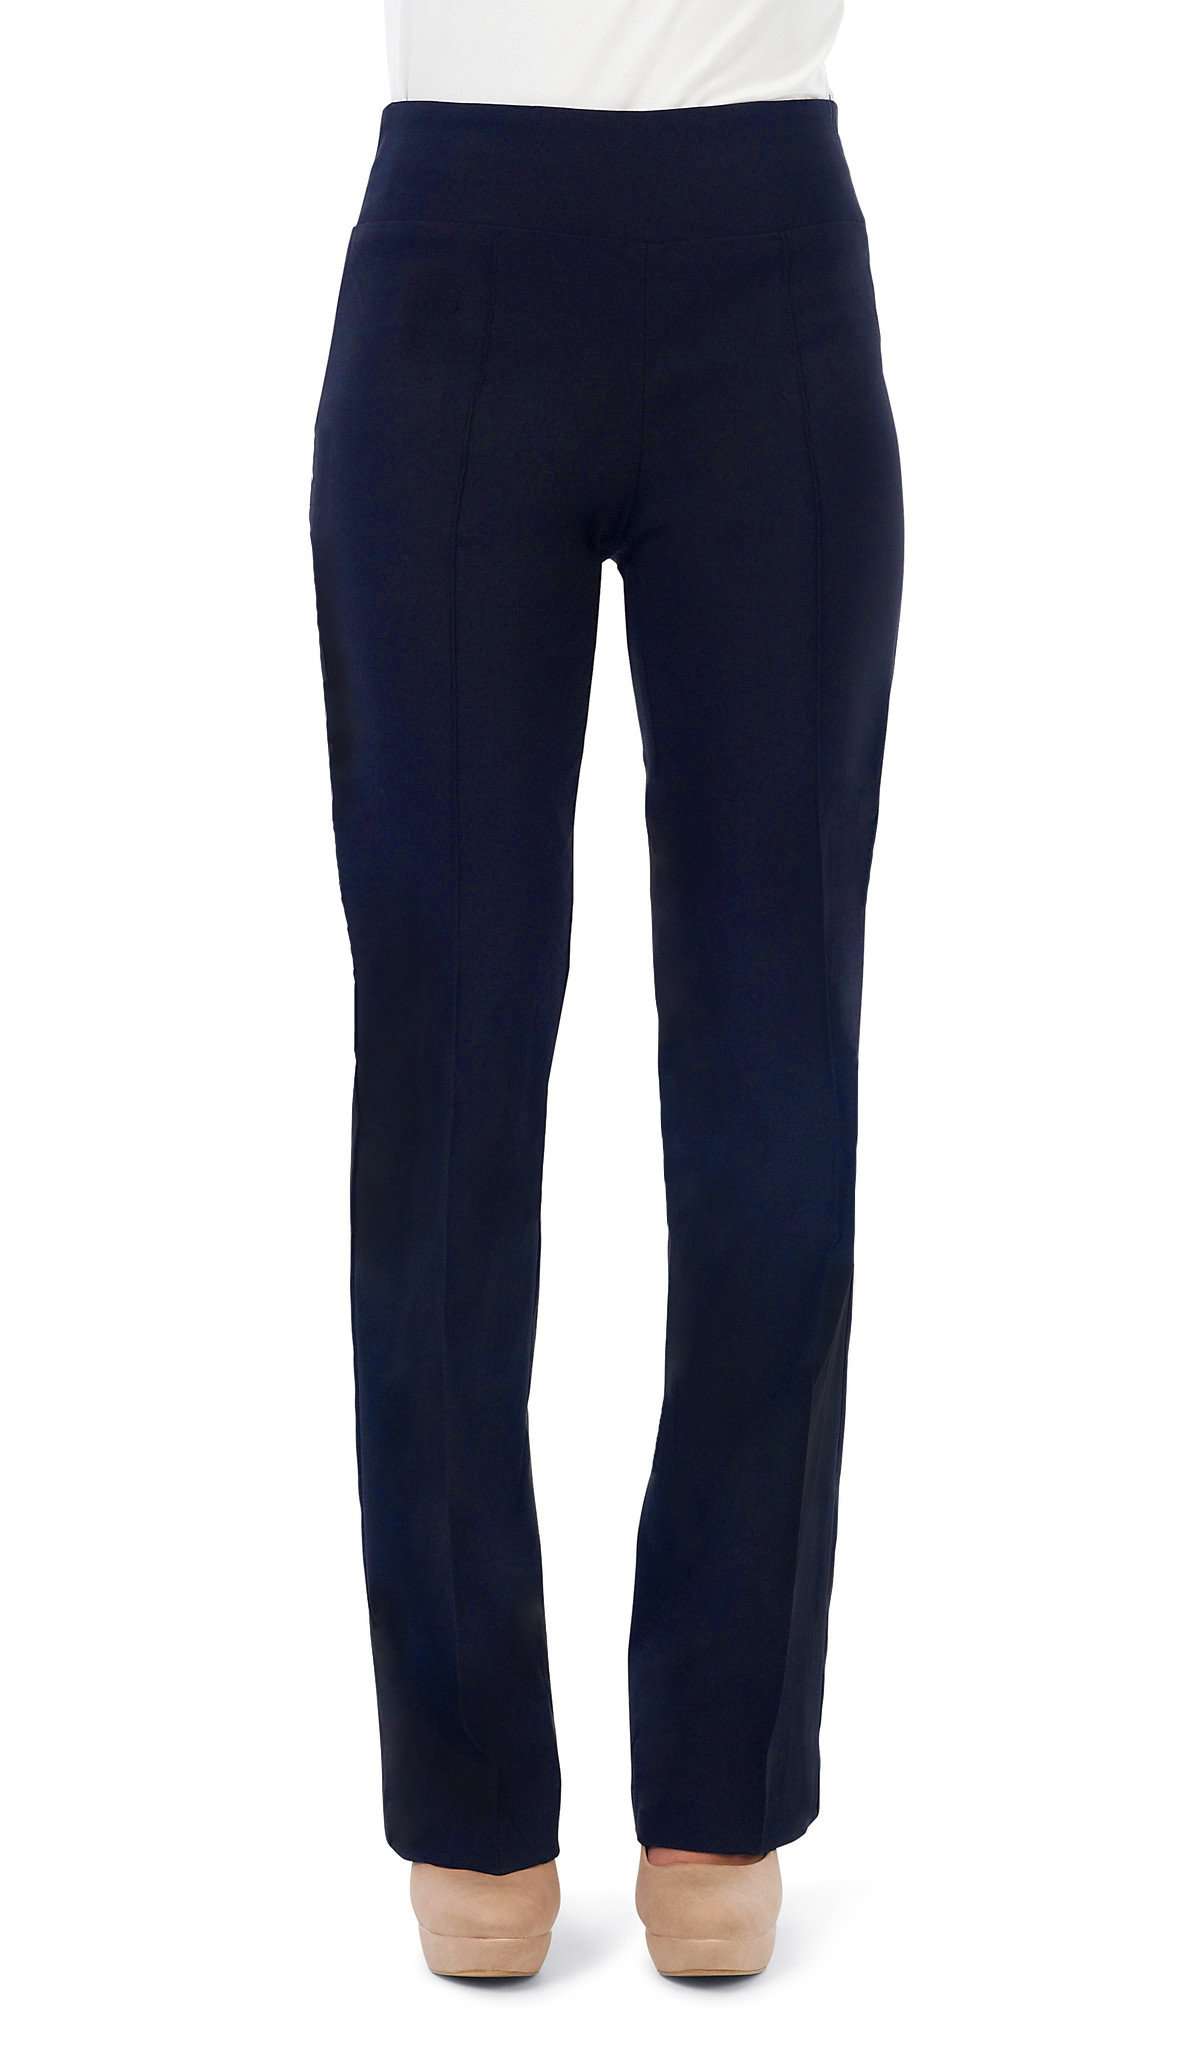 Women's Pants Navy &quot;Miracle Fit&quot; Our Best Seller Navy Quality Stretch Fabric Wash after Wash This is Your Go TO Pant Made in Canada Yvonne Marie Designer - Yvonne Marie - Yvonne Marie